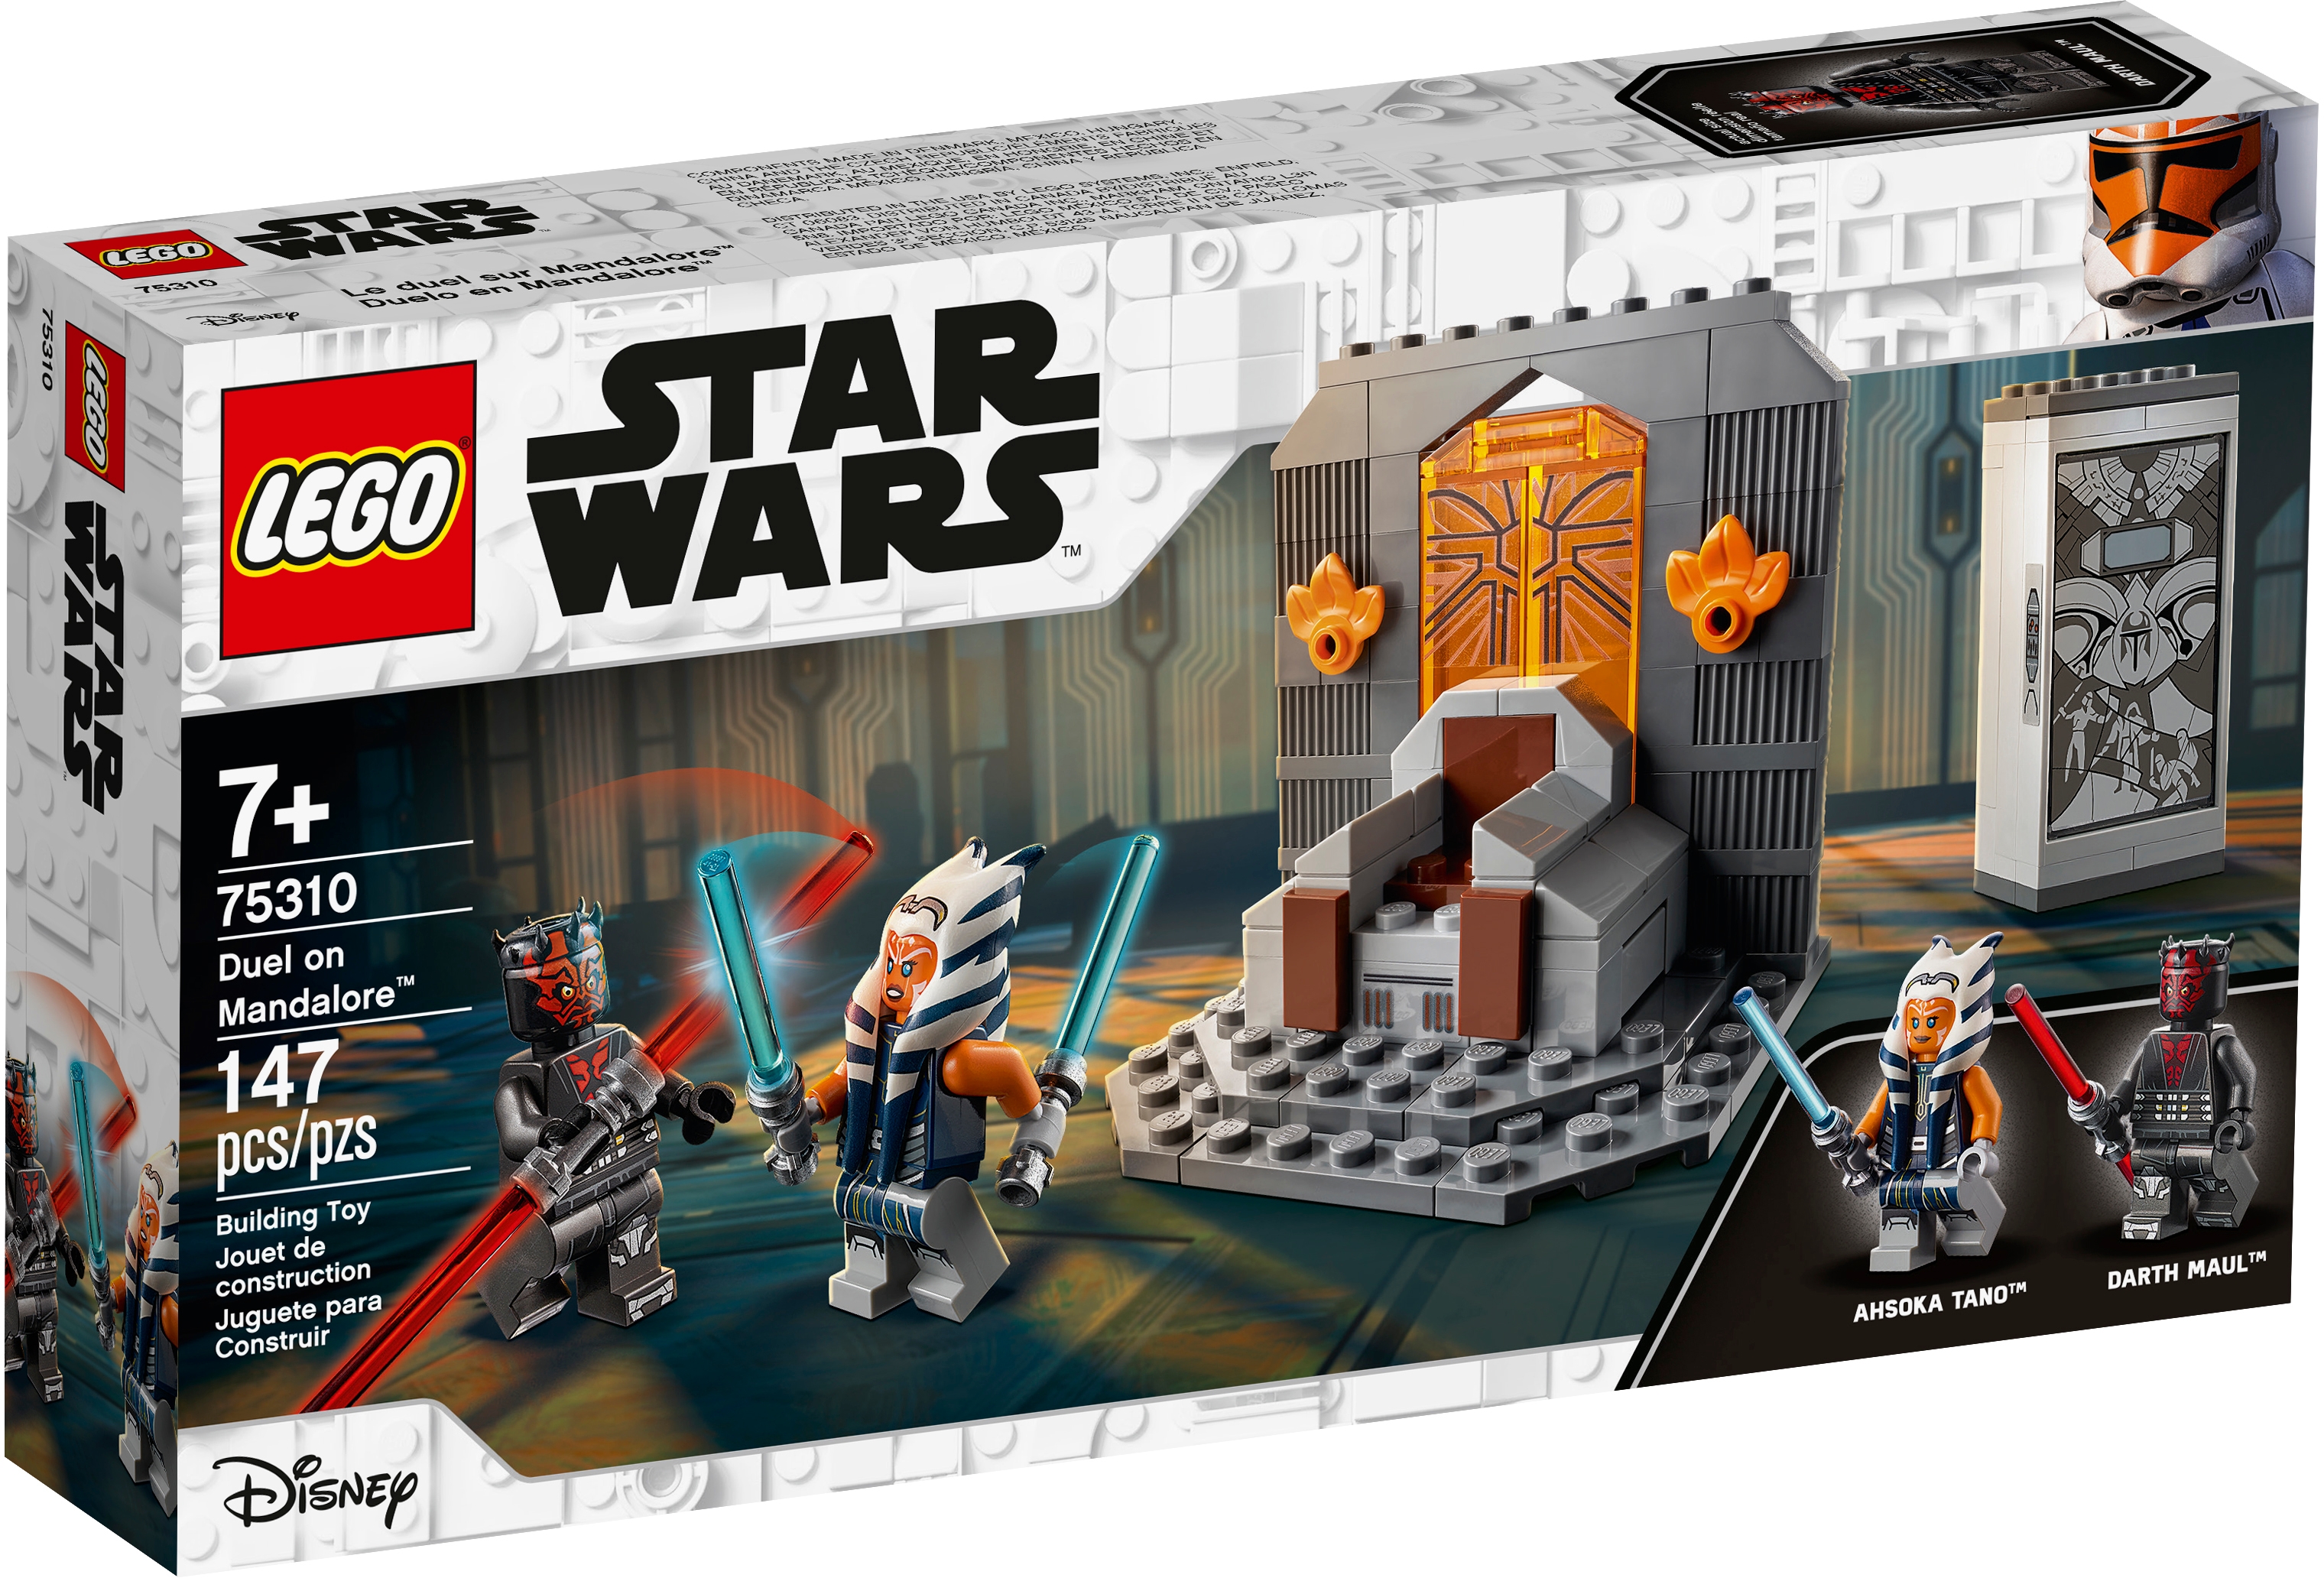 on Mandalore™ 75310 | Star Wars™ | online at the Official LEGO® Shop US